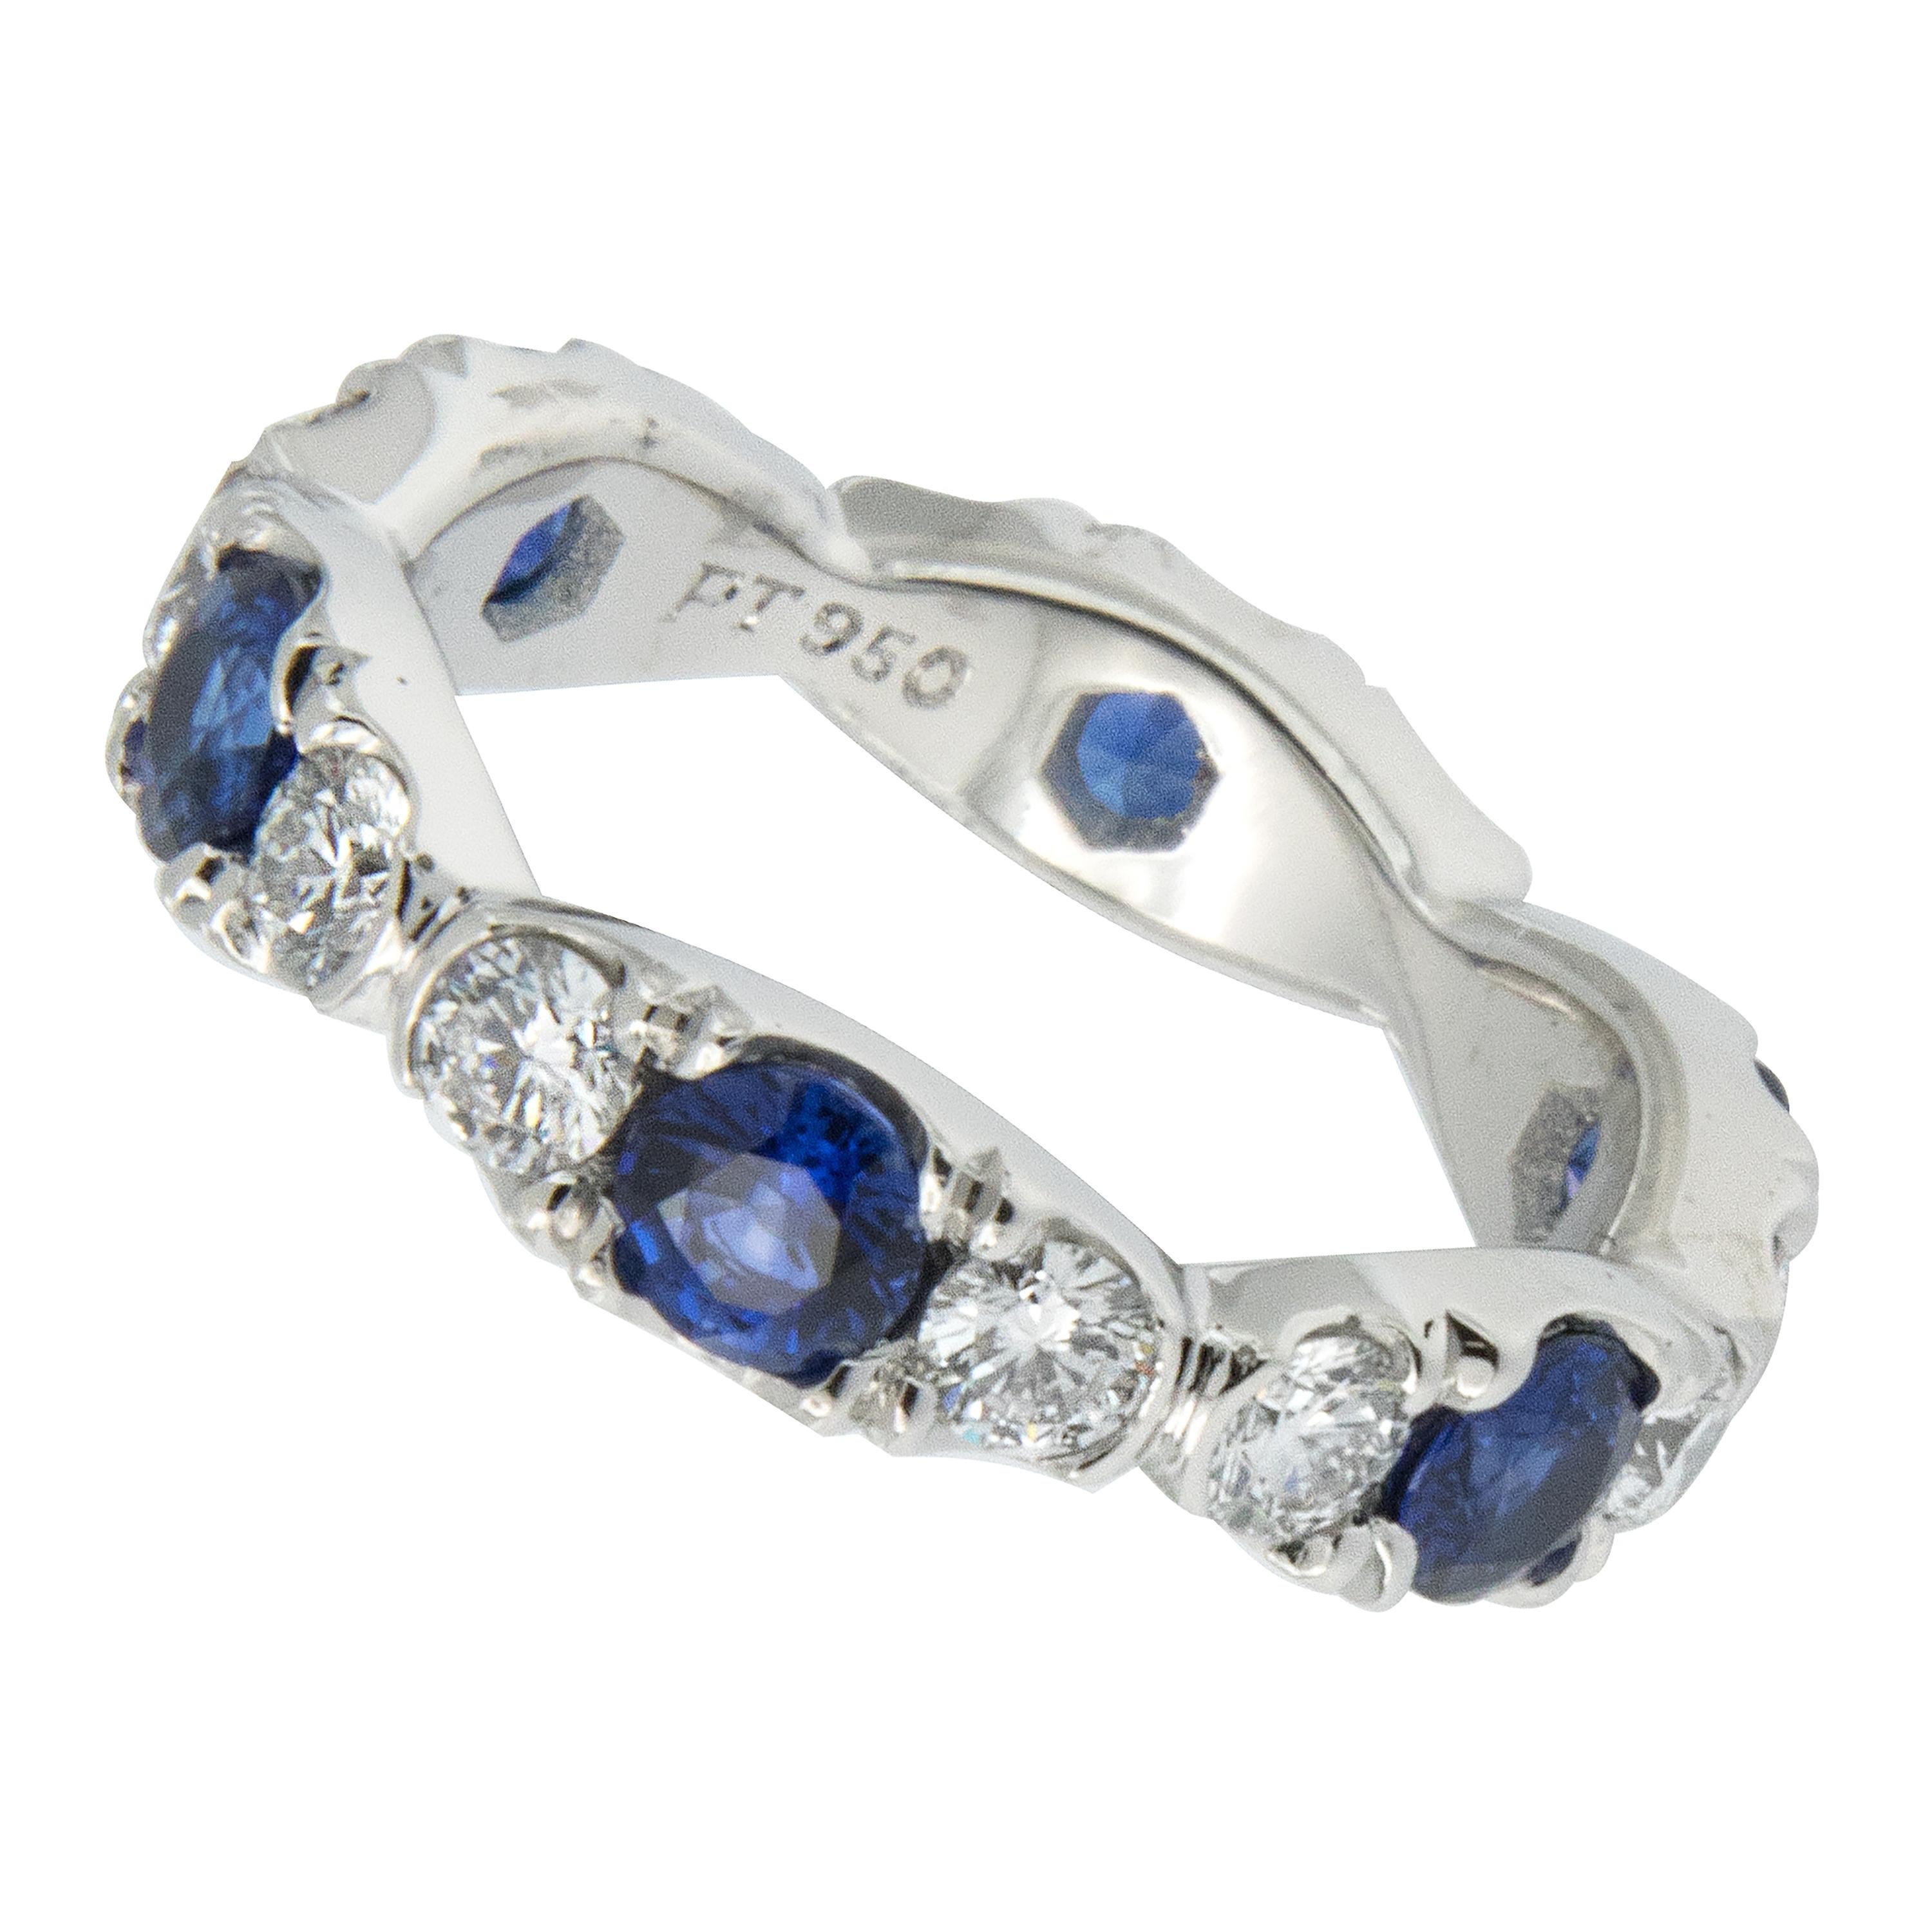 Expertly hand fabricated eternity band by William Rosenberg made from noble metal platinum with 1.71 Cttw blue sapphires & 1.03 Cttw diamonds showing hearts & arrows of VVS clarity & F color. This scalloped ring was made in a size 6 but can be